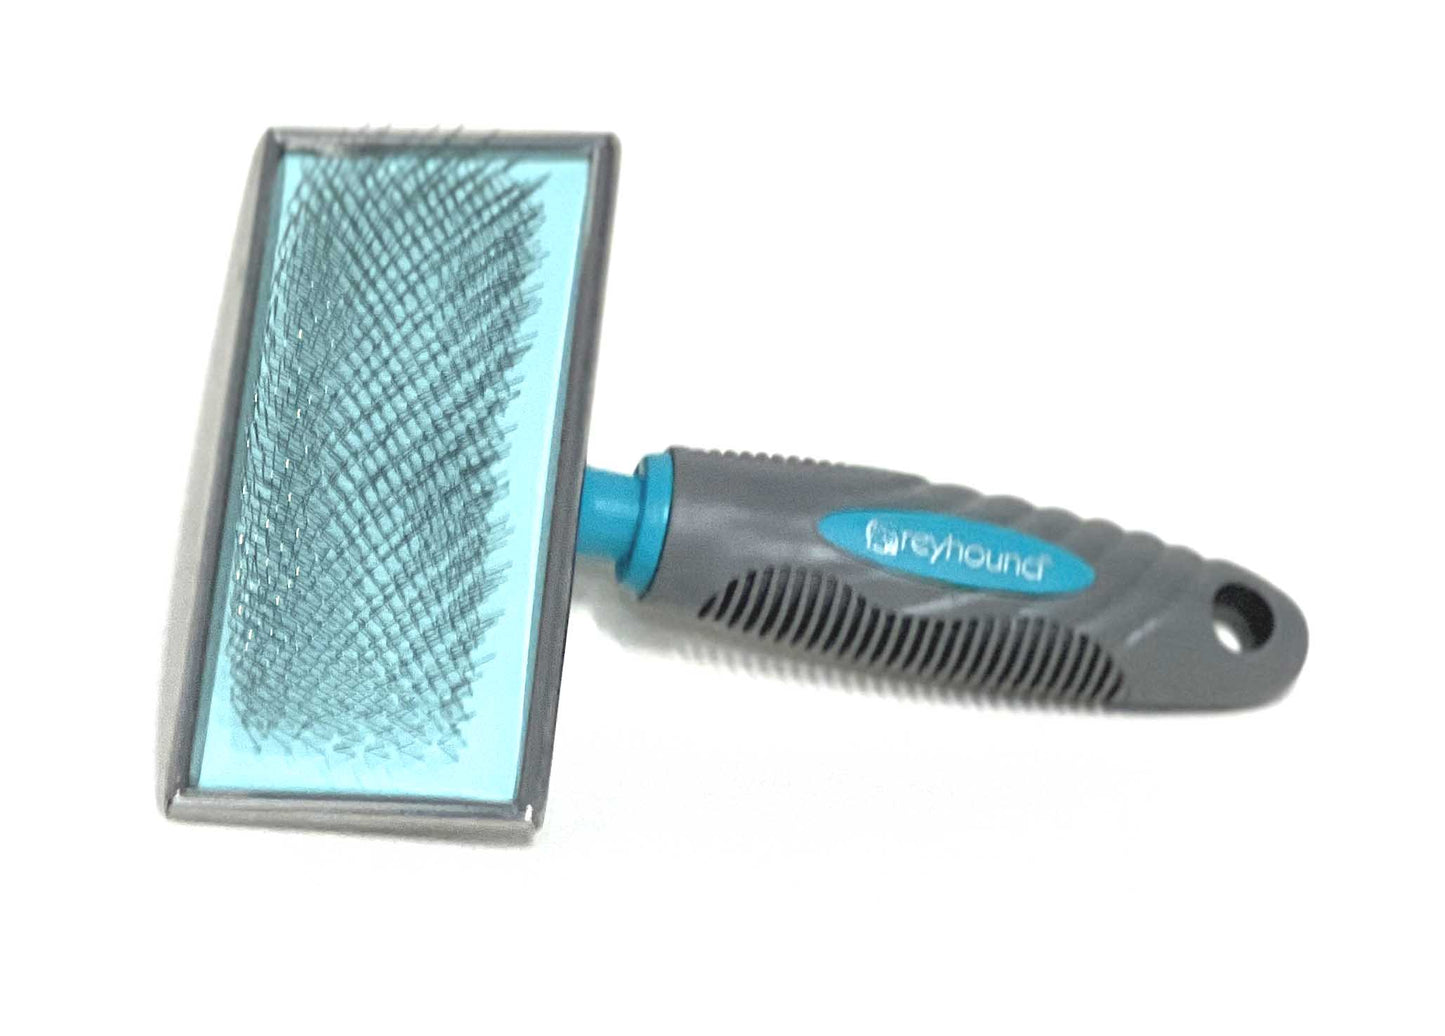 The Ashley Craig Professional Pet Grooming Slicker is designed to be softer with a floating pad to prevent brush burn. Stainless steel, bent pins are longer, measuring 15mm or 25mm to help easily remove dead coa